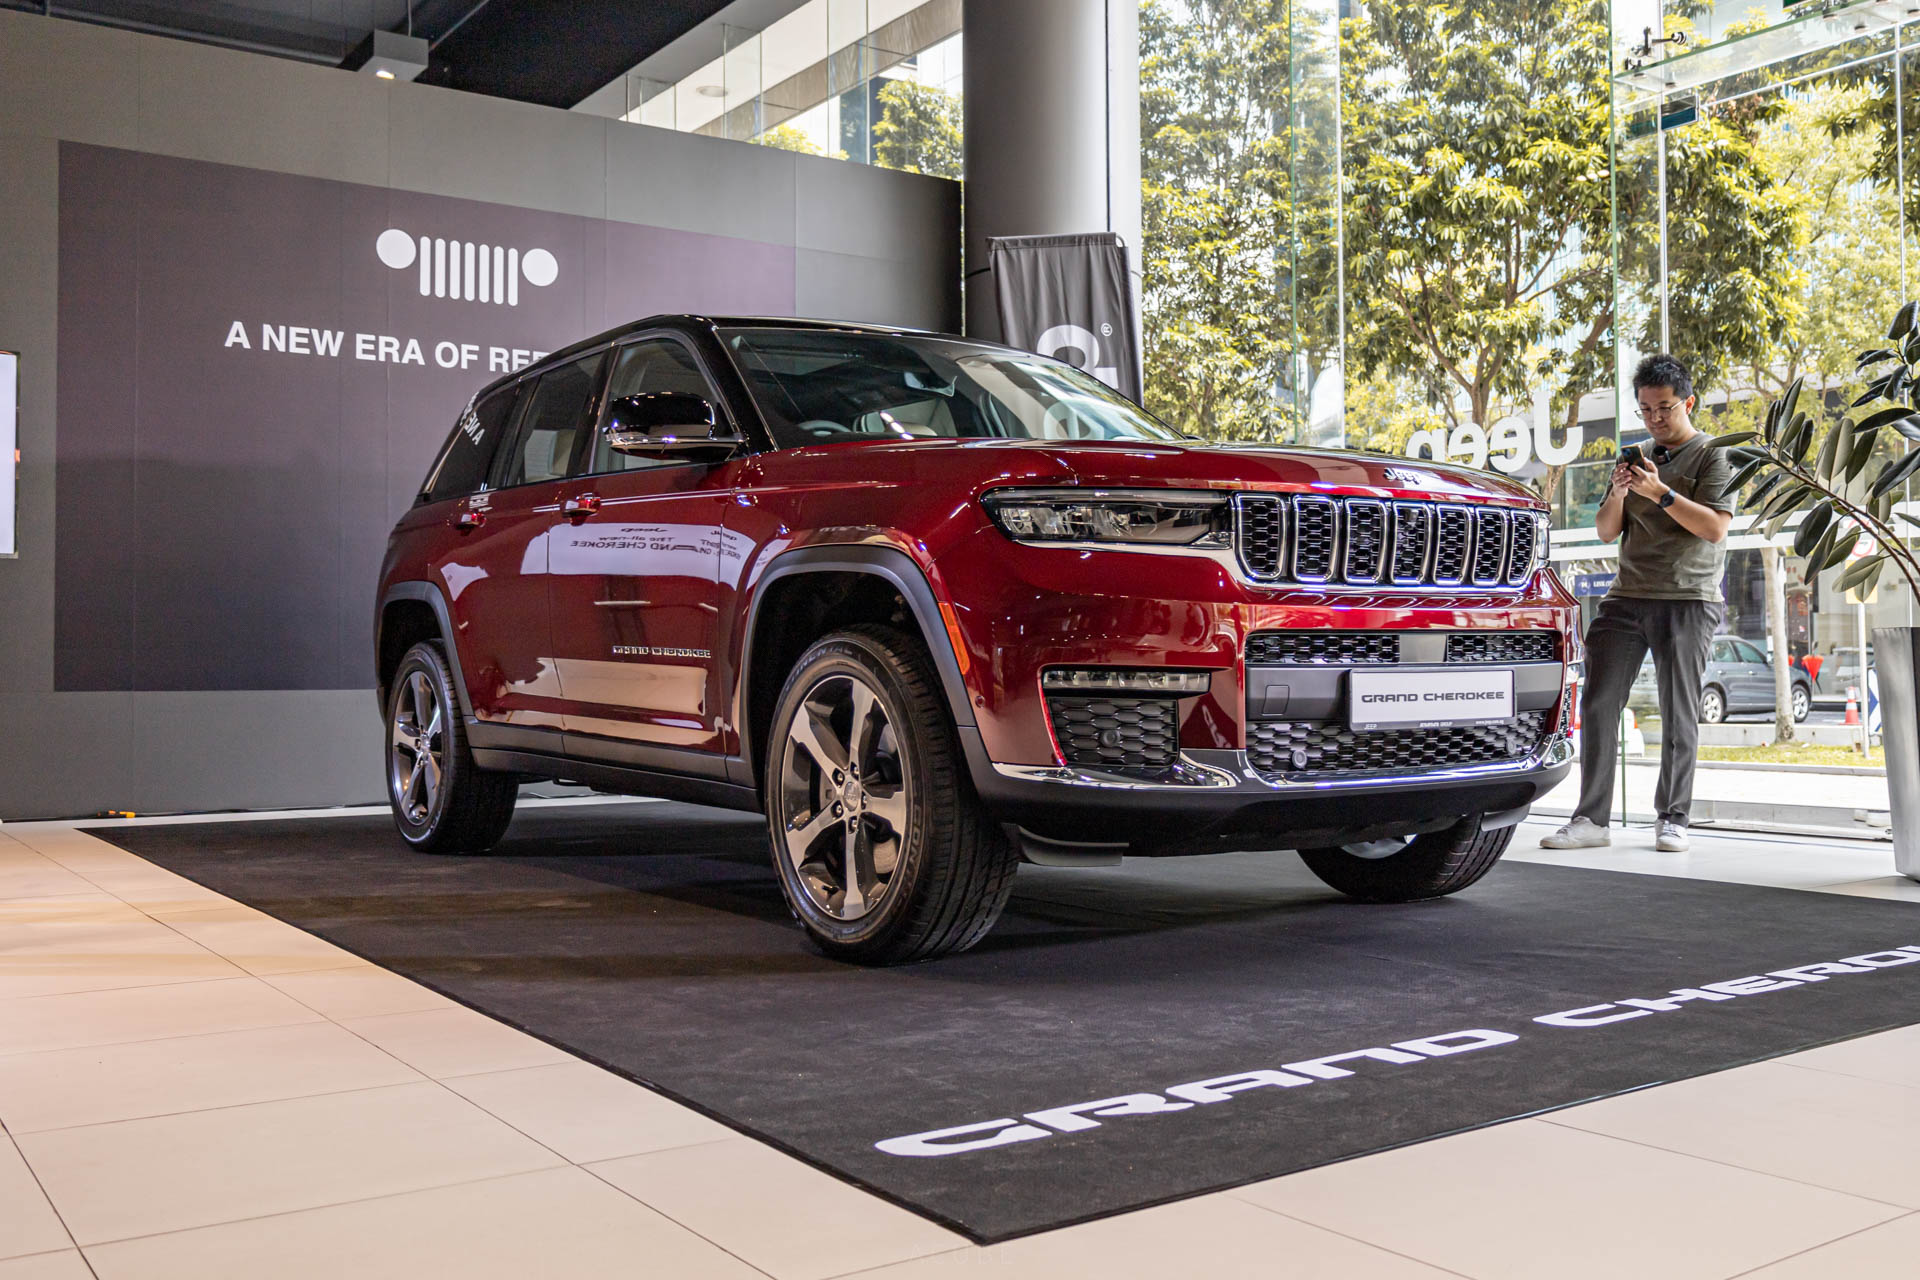 capella auto unveils all-new jeep grand cherokee, and test drives are now available!